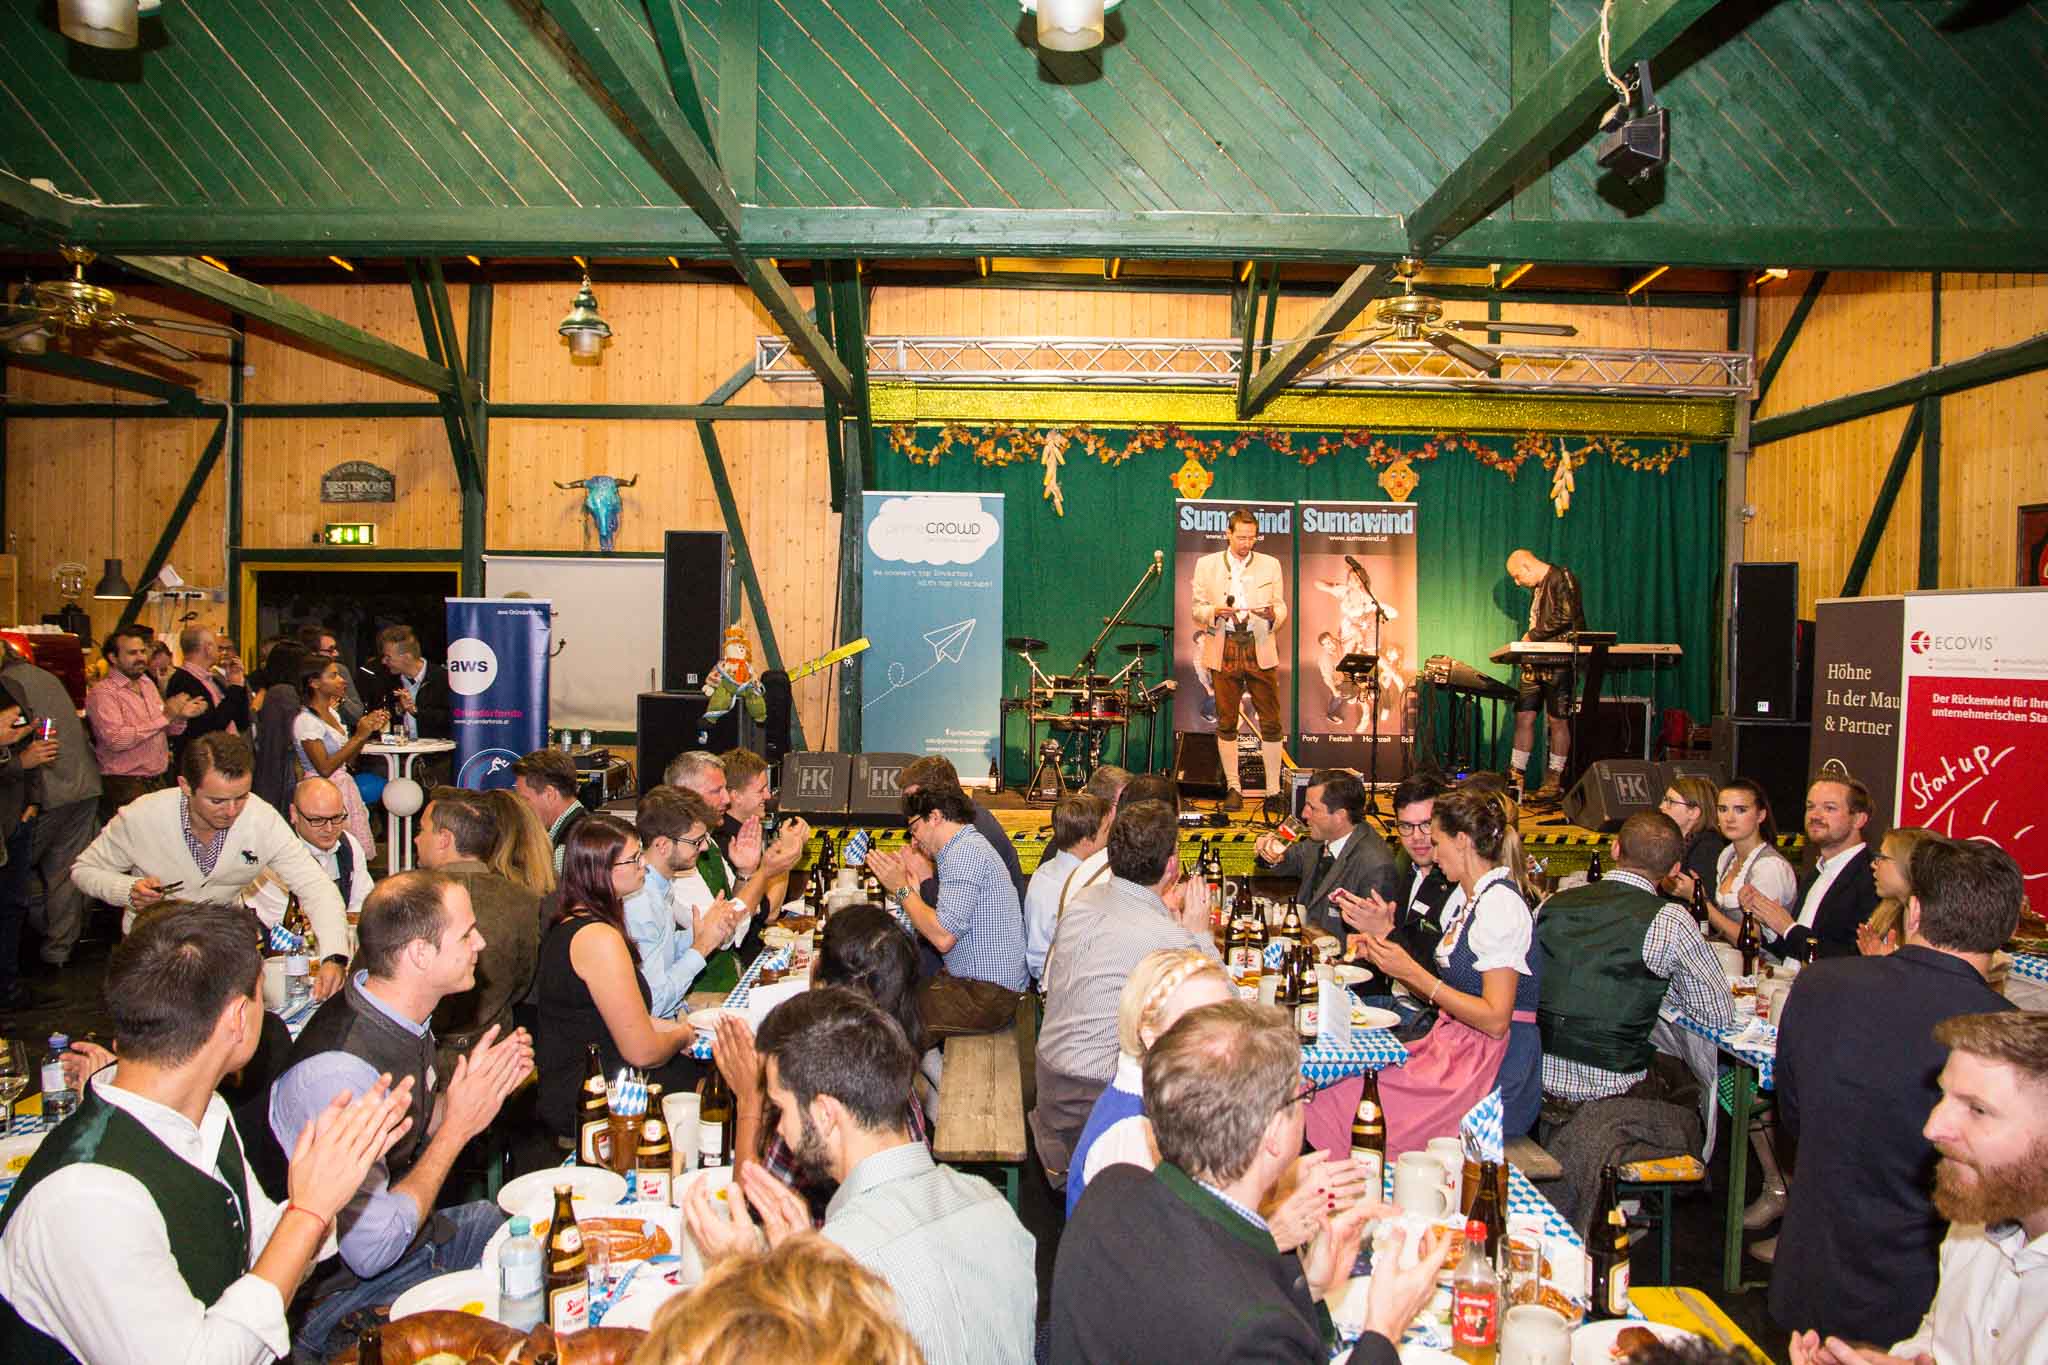 Review: This was the Oktoberfest for start-up enthusiasts